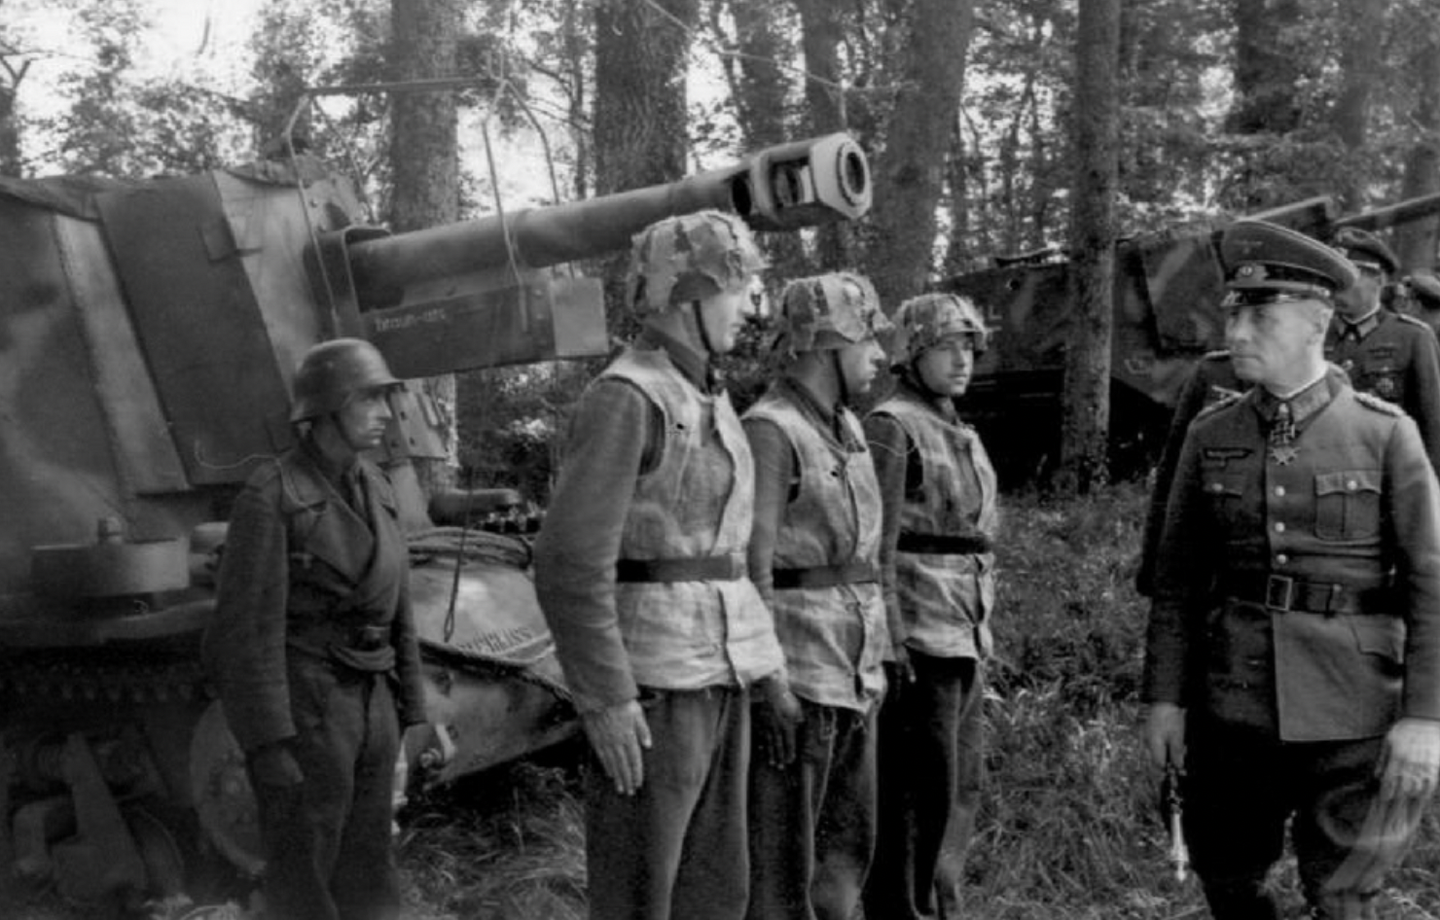 Rommel inspecting 21st Panzer Division in May, 1944. Image: German Federal Archives.